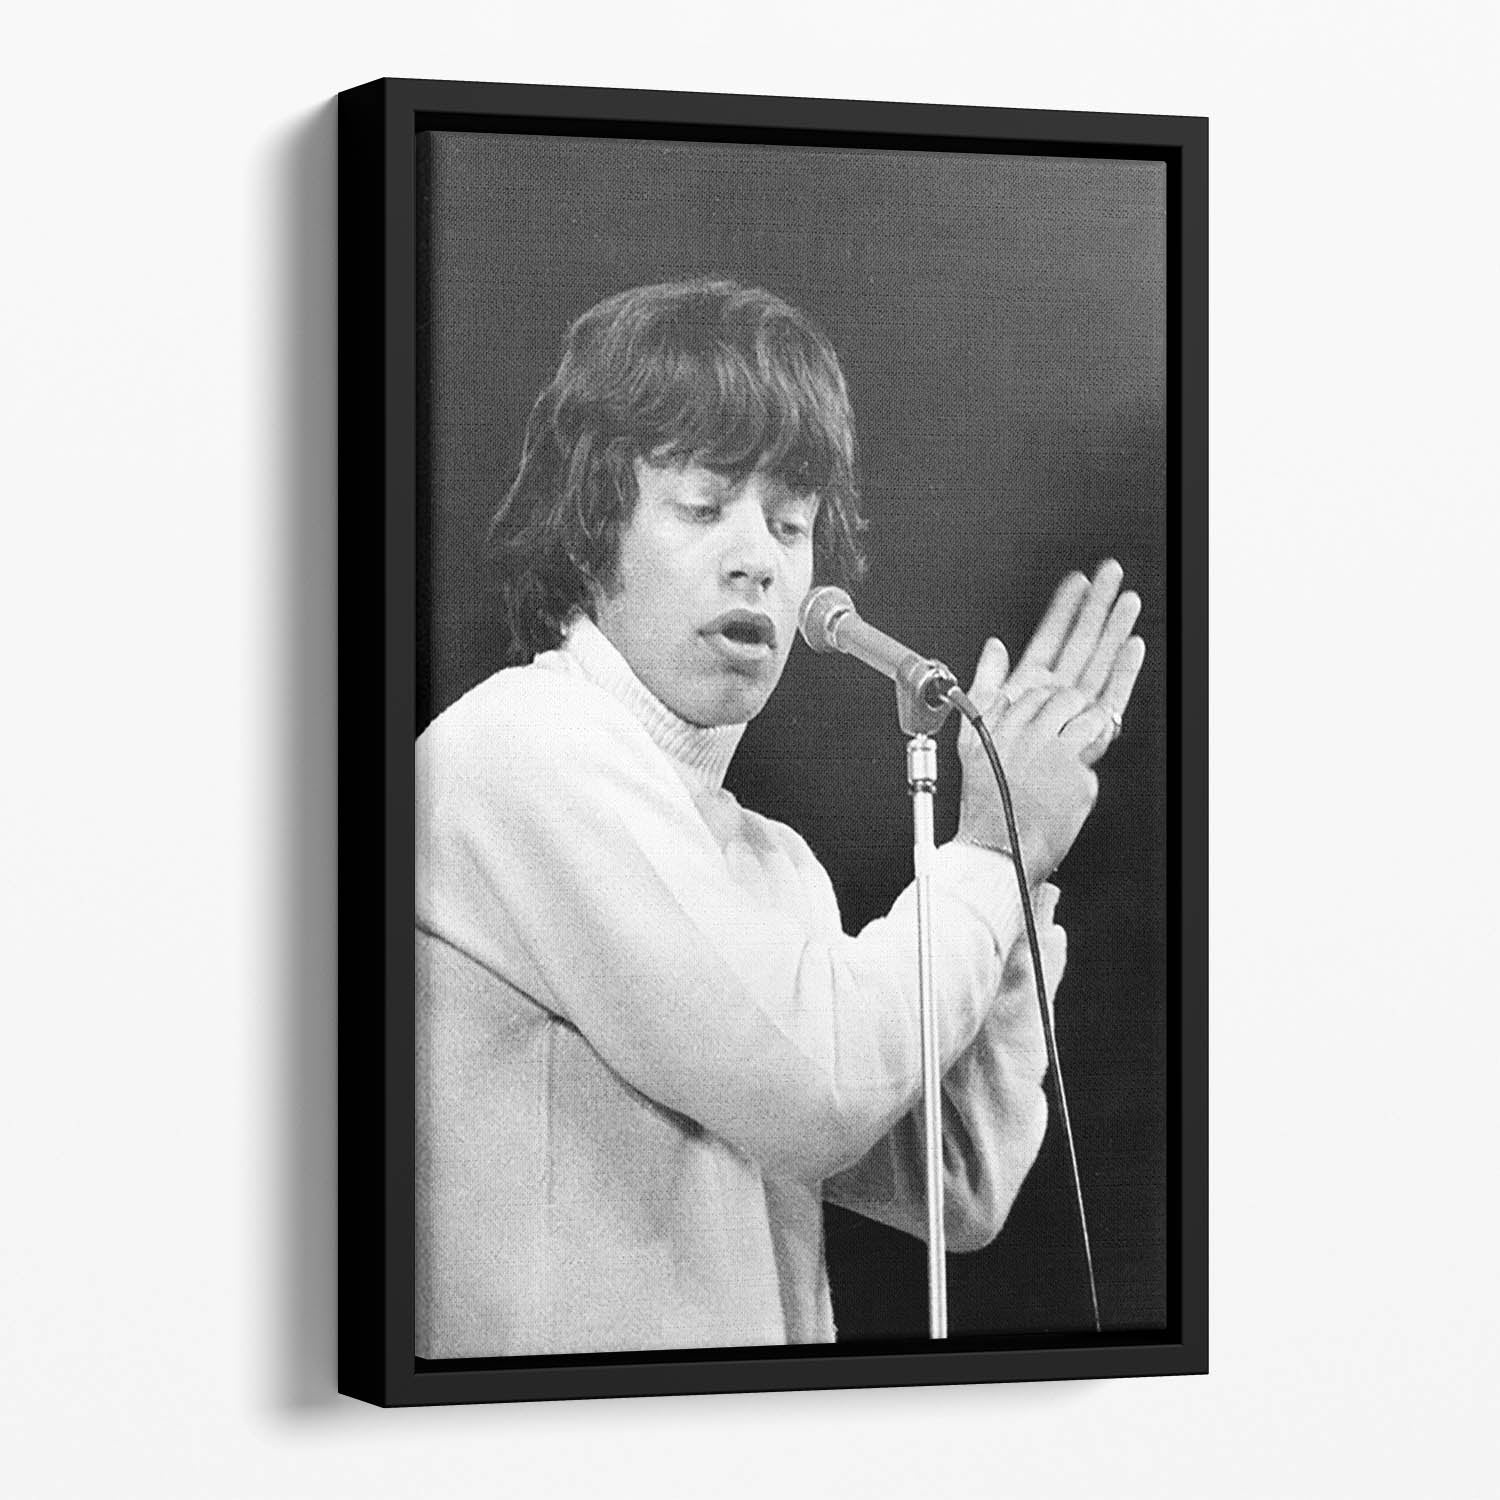 Mick Jagger on stage in 1965 Floating Framed Canvas